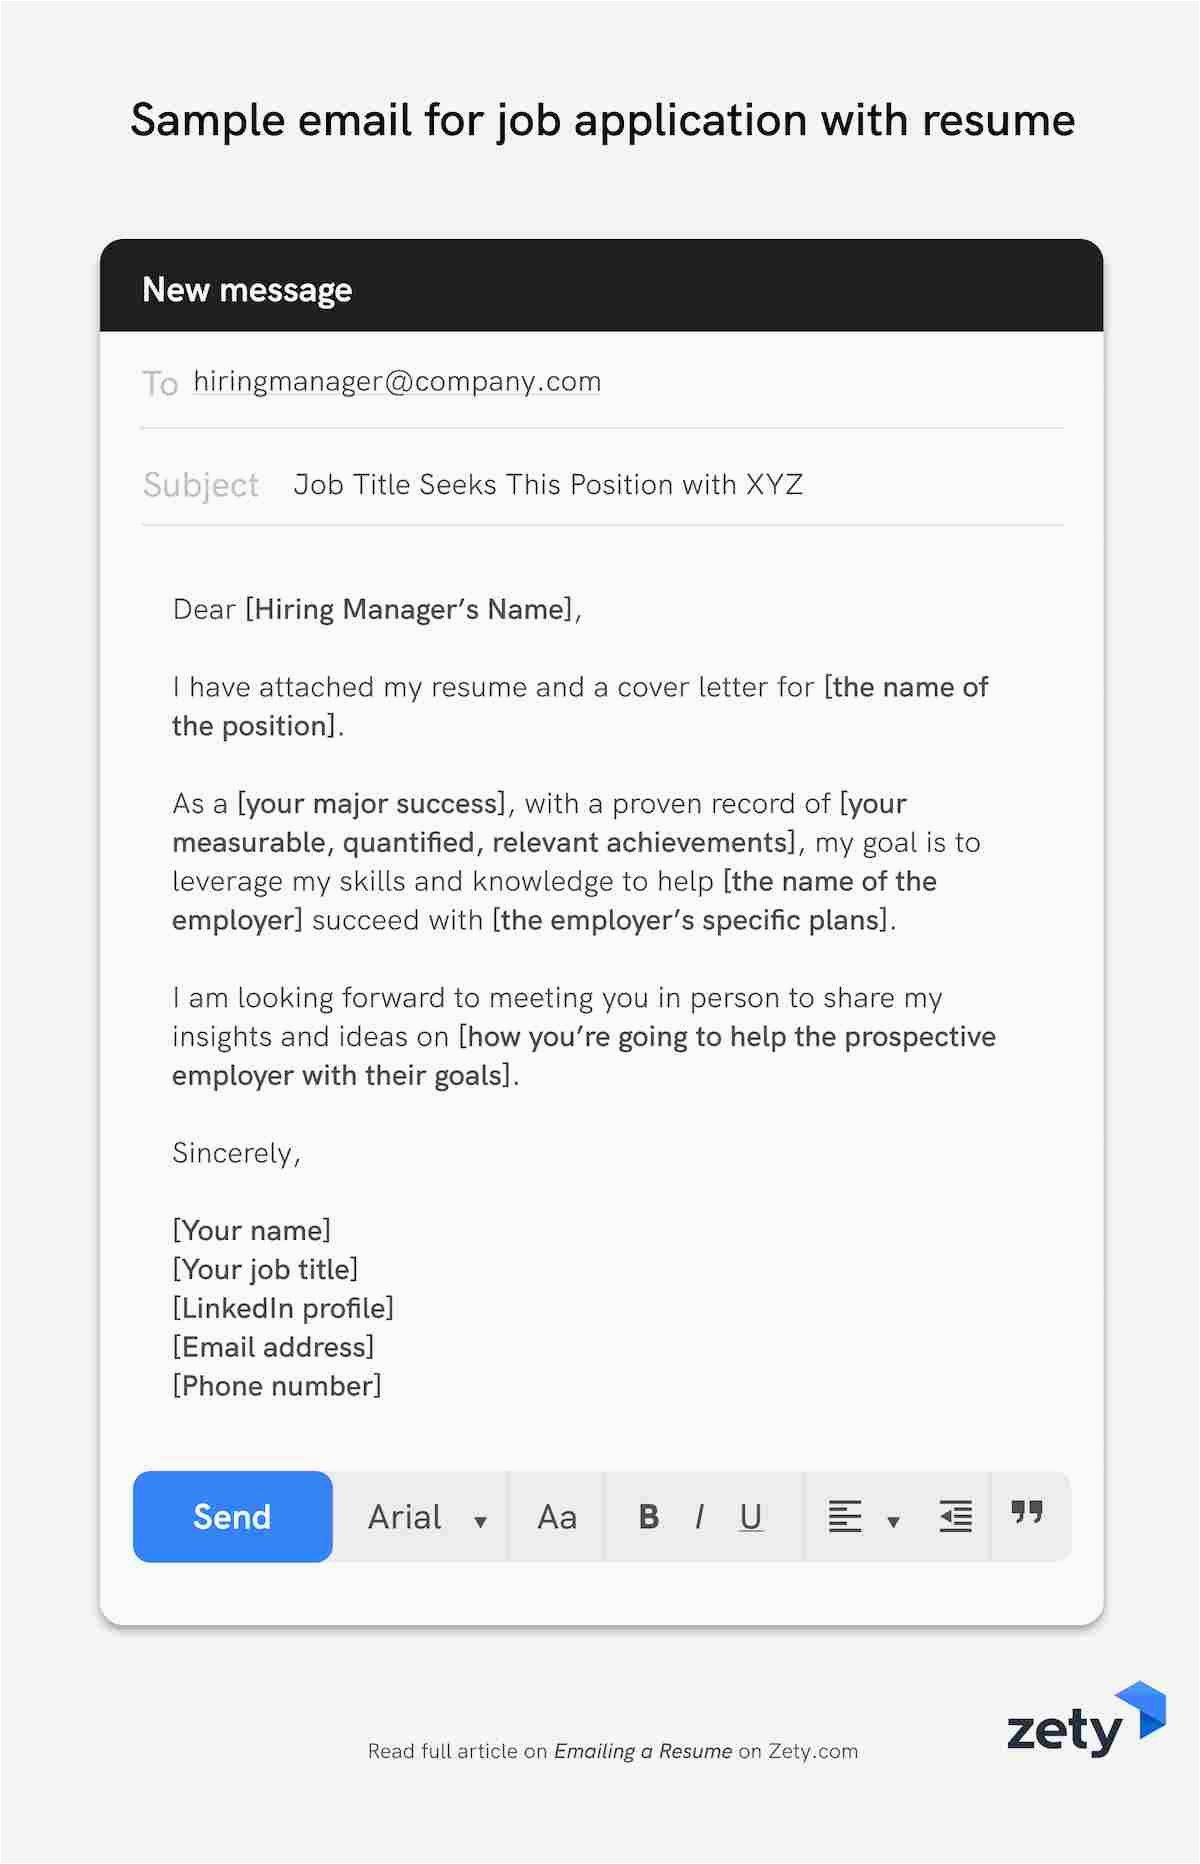 Sample Email to Send Resume for Job with Reference Emailing A Resume 12 Job Application Email Samples